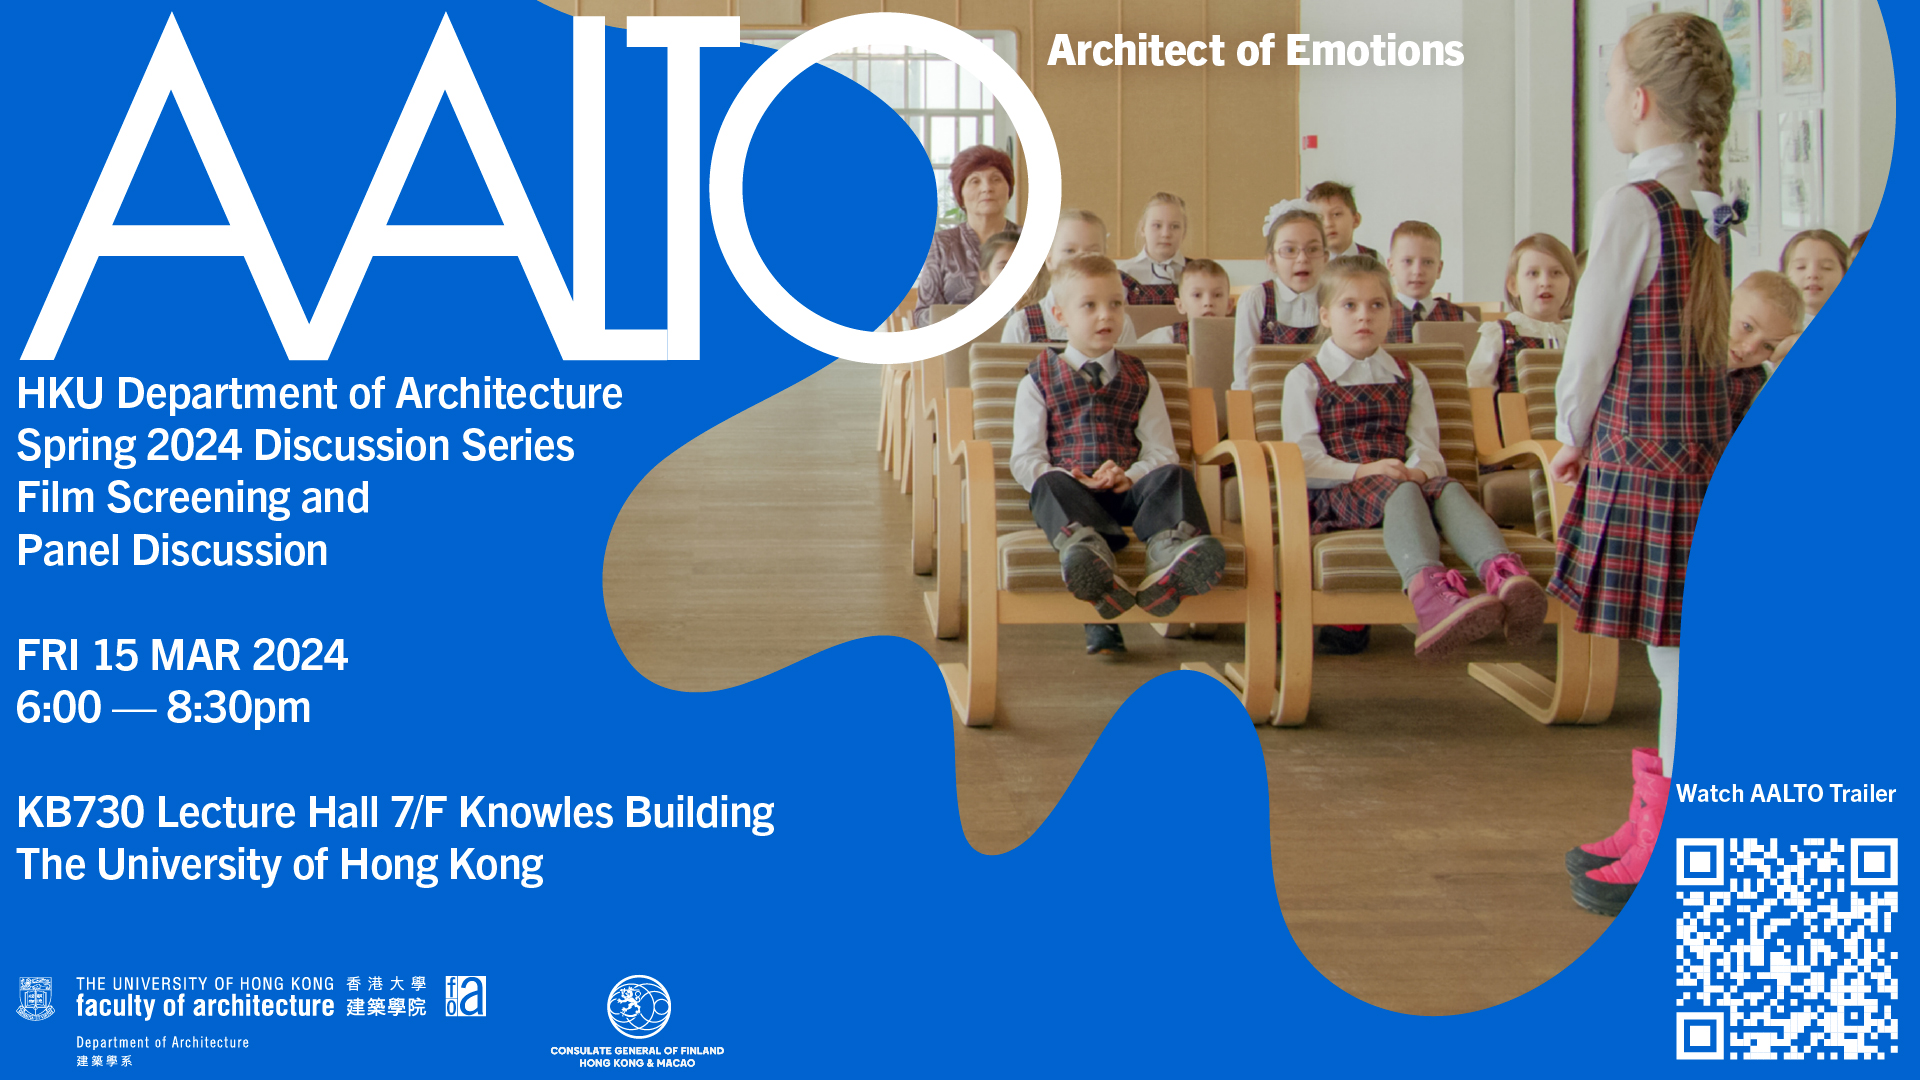 Aalto â Film Screening and Panel Discussion